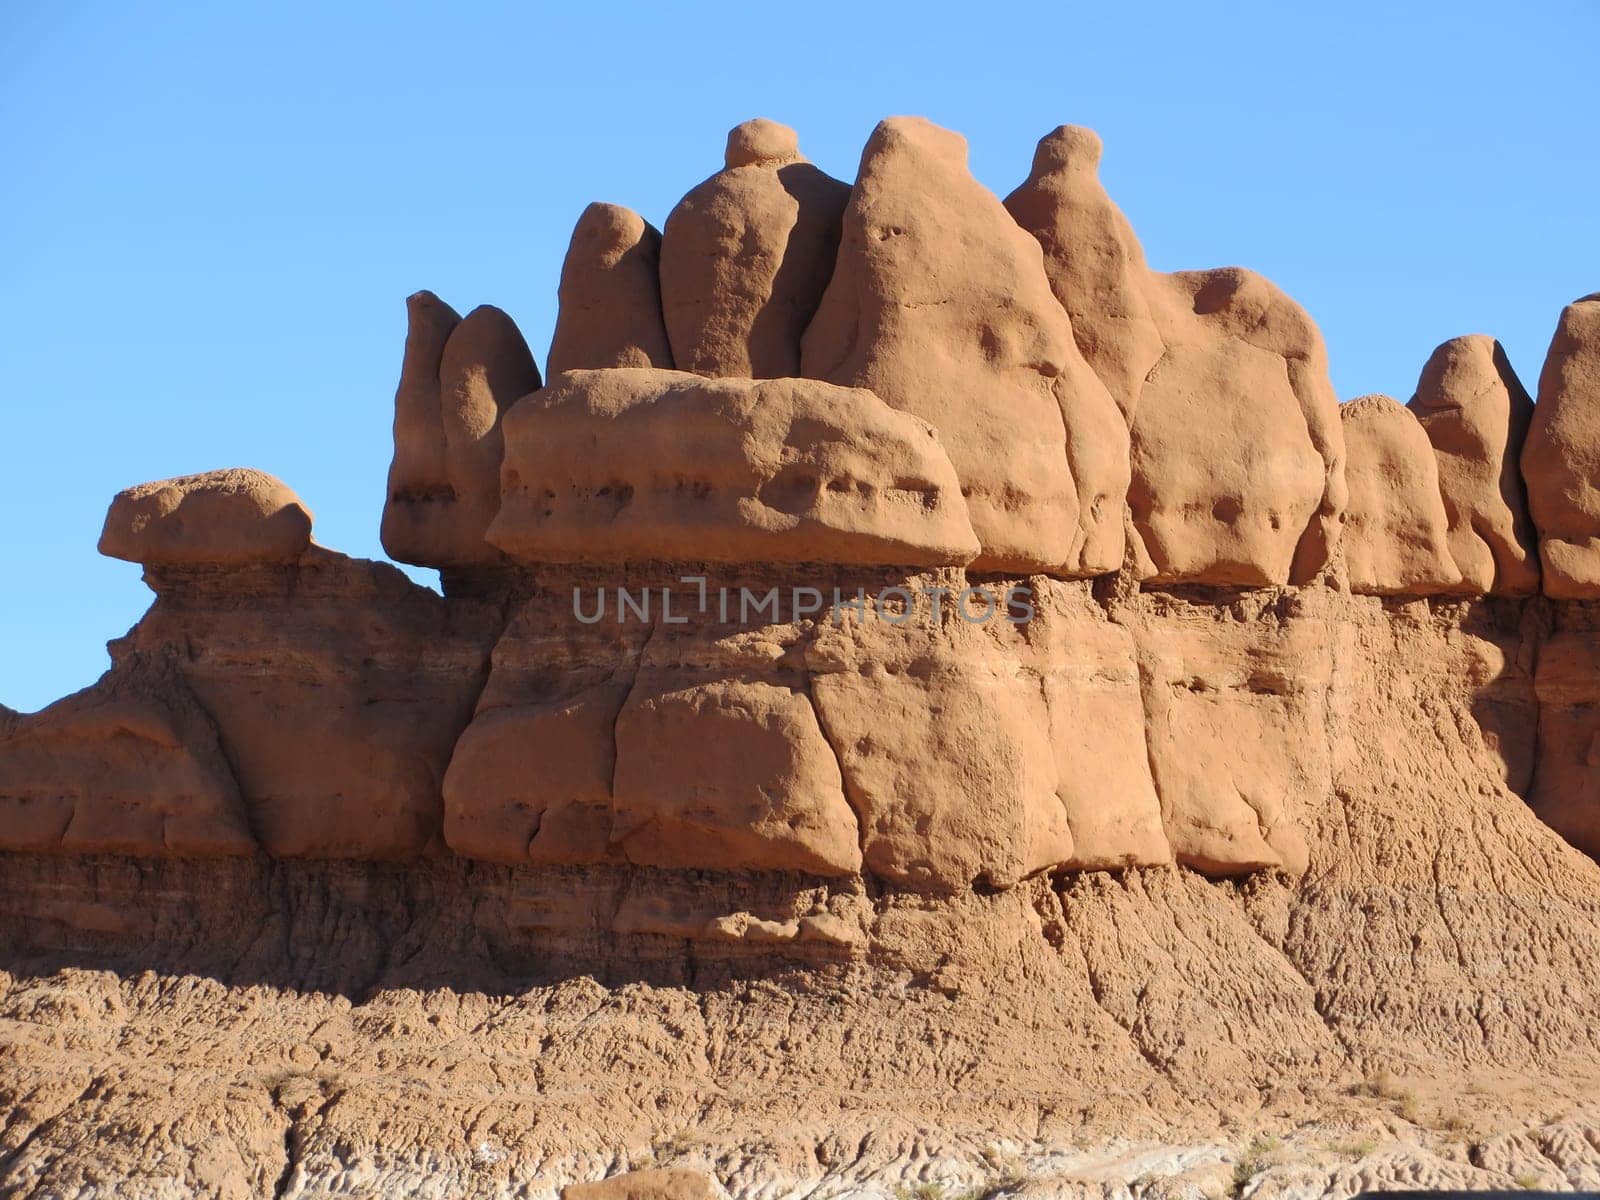 Beauty in Nature, Rock Formations at Goblin Valley State Park, Utah, USA. High quality photo